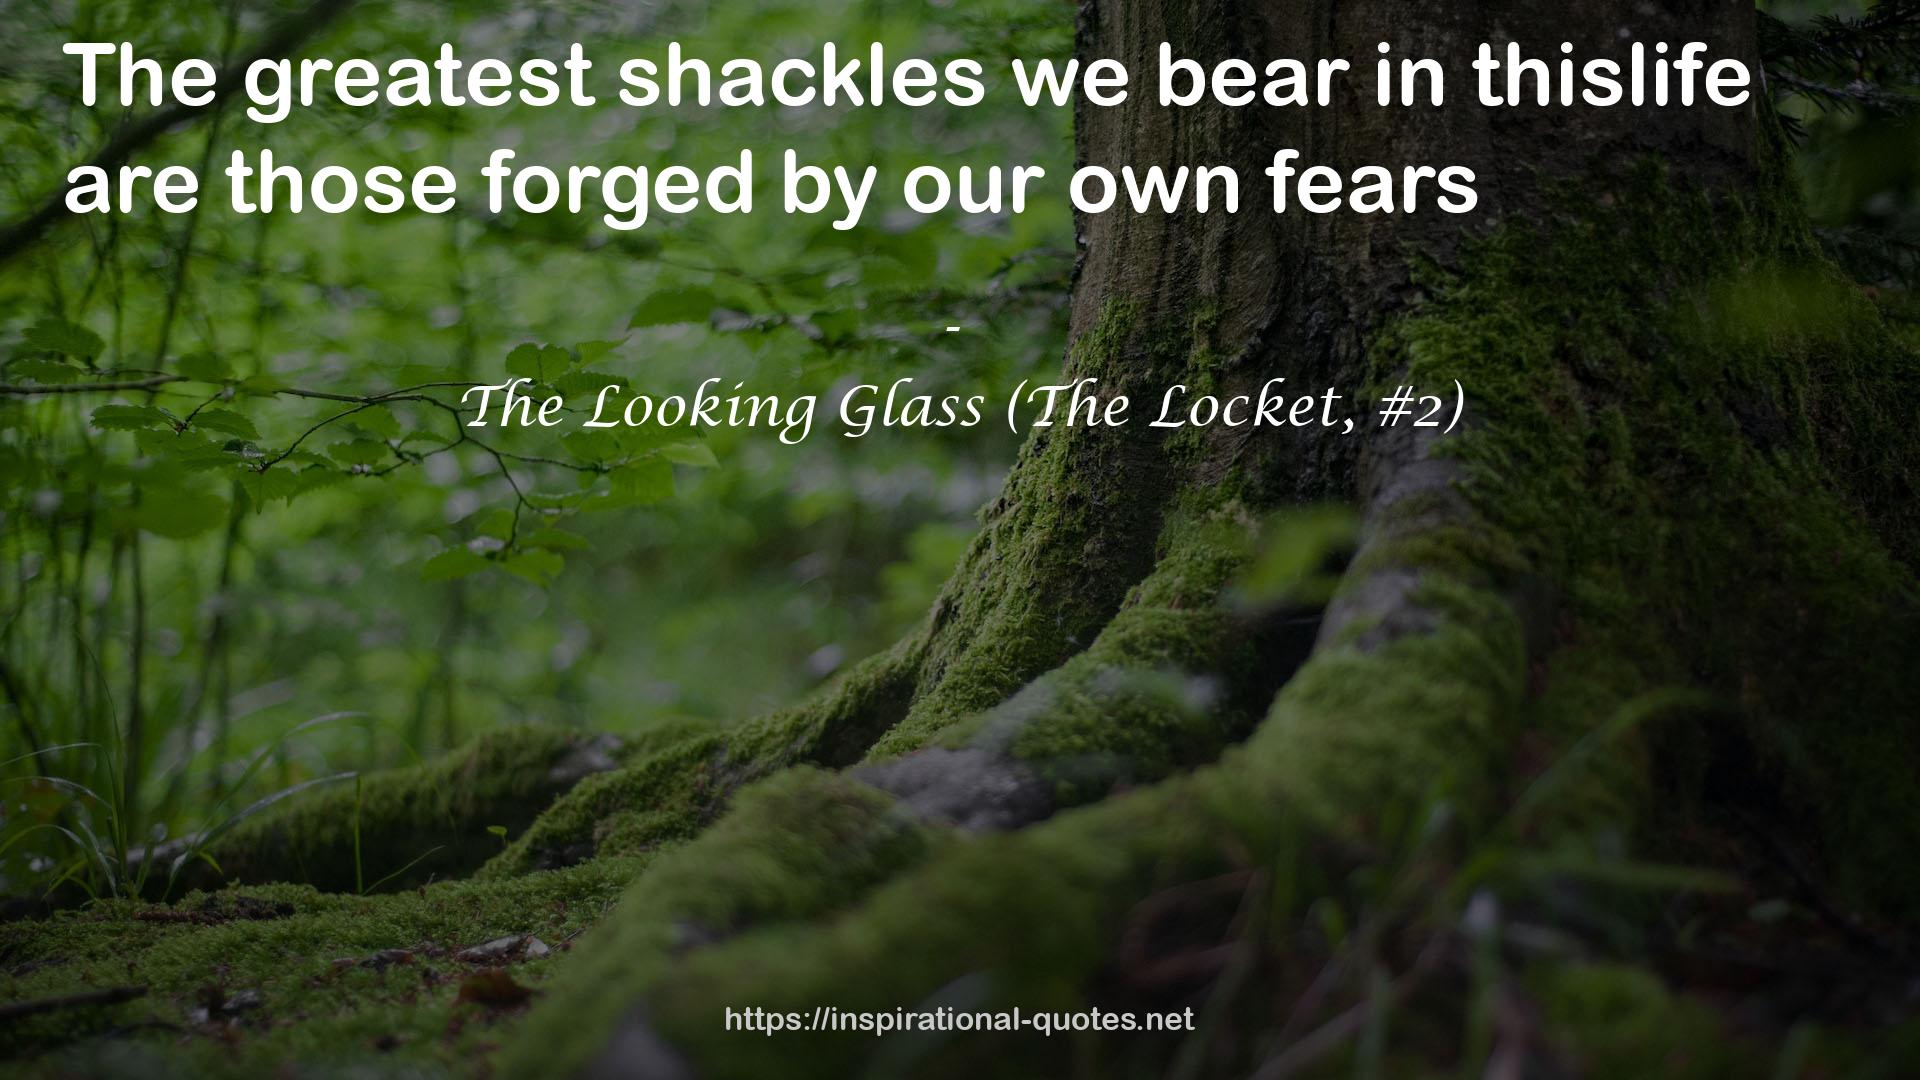 The Looking Glass (The Locket, #2) QUOTES